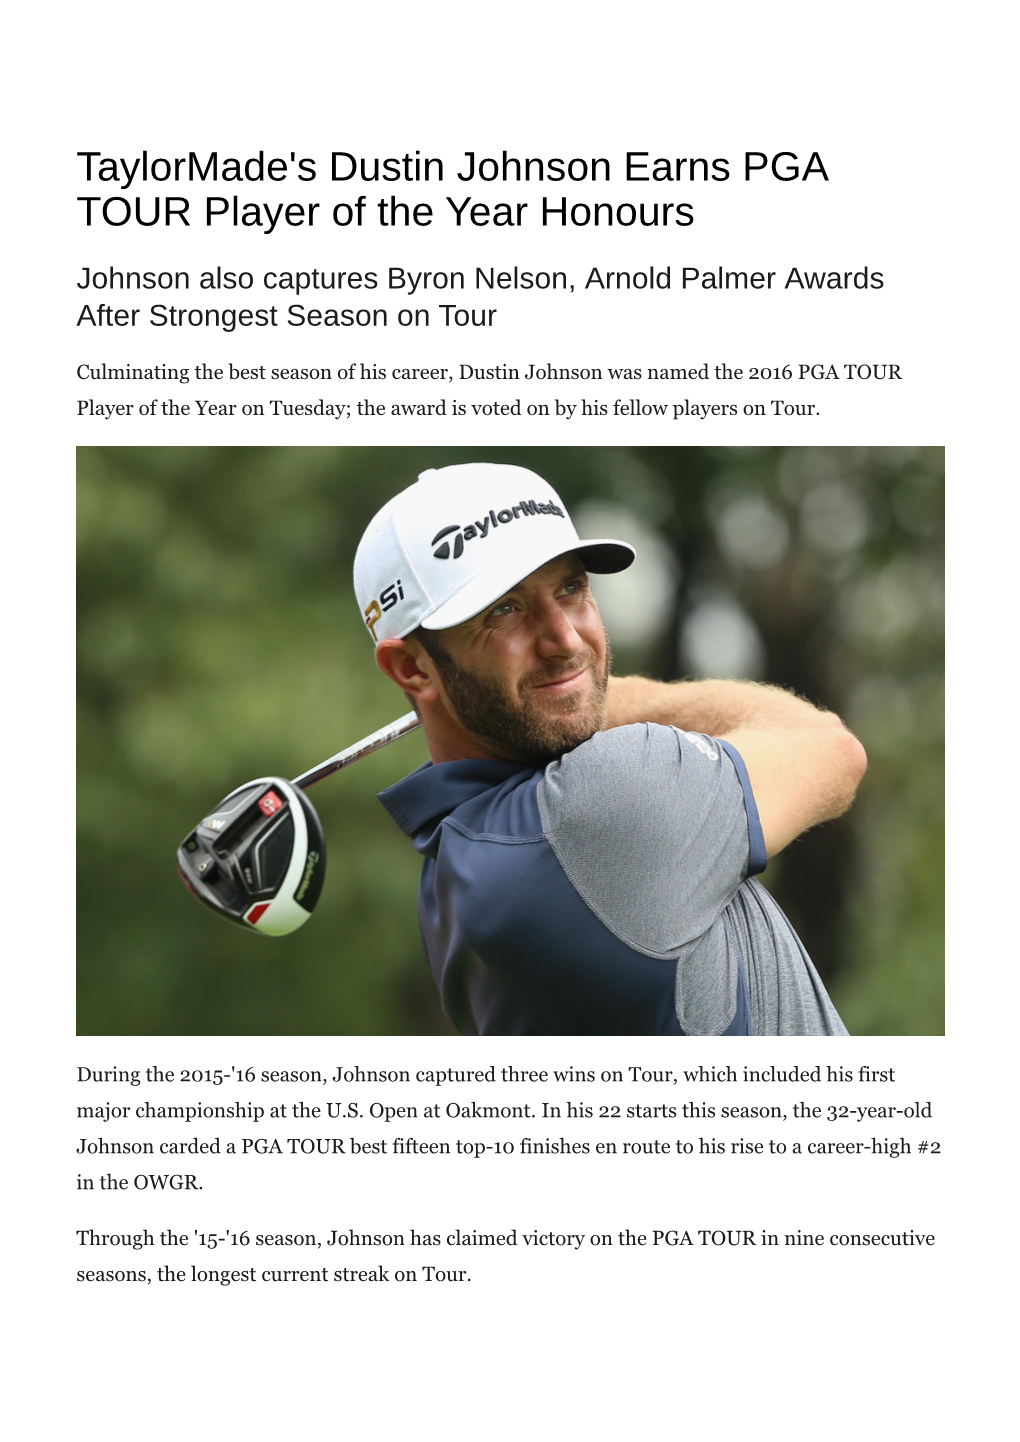 Taylormade's Dustin Johnson Earns PGA TOUR Player of the Year Honours